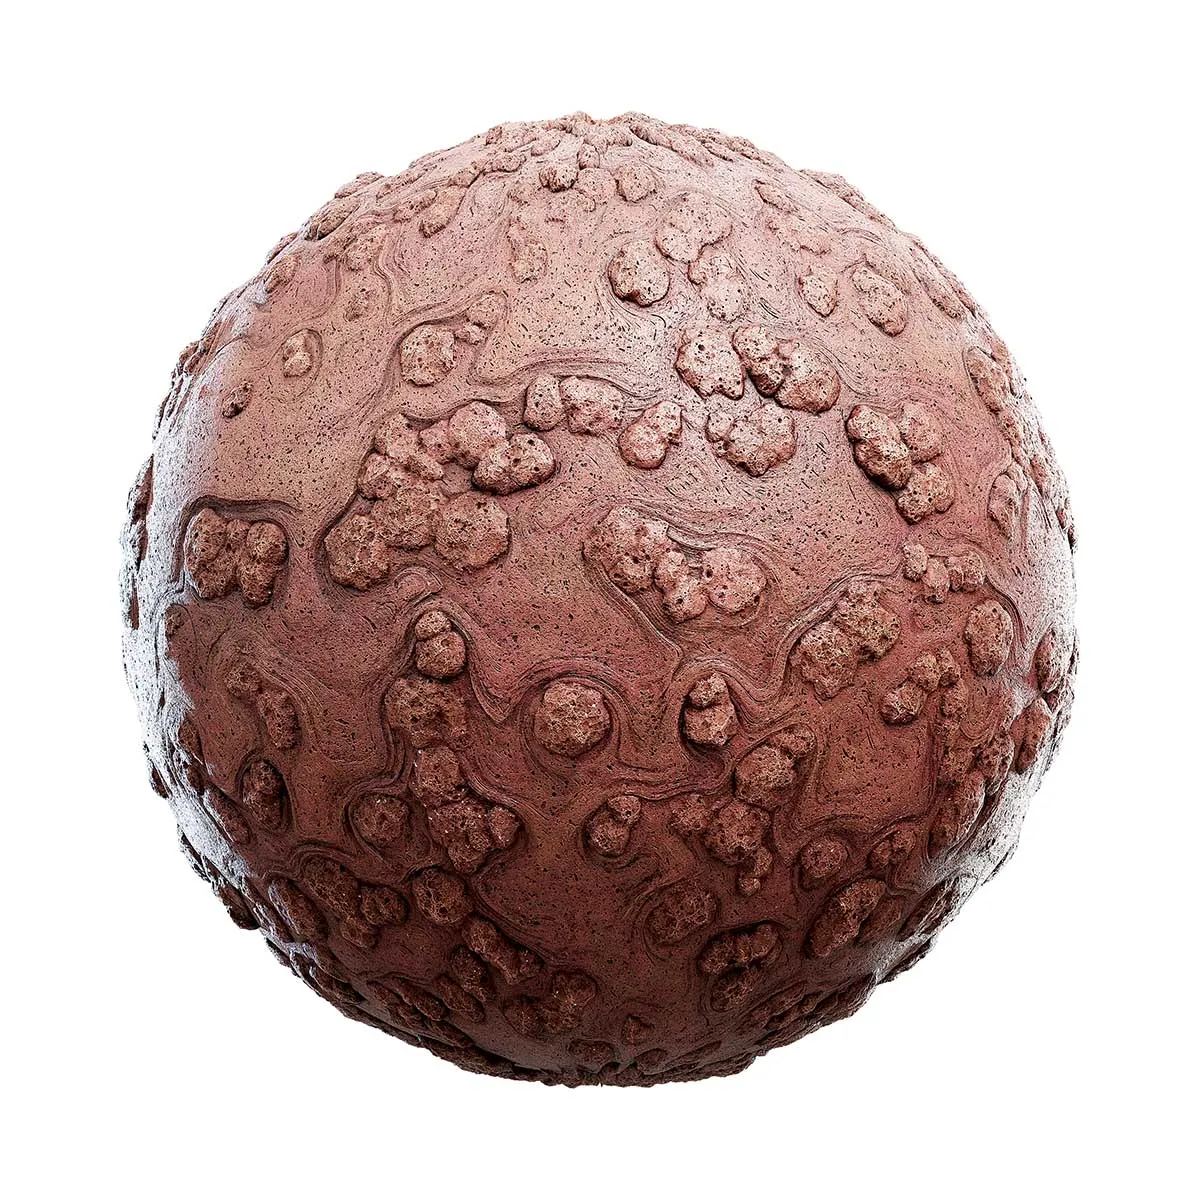 PBR Textures Volume 41 – Clay – 4K – 8K – dripping_red_clay_with_stones_44_32